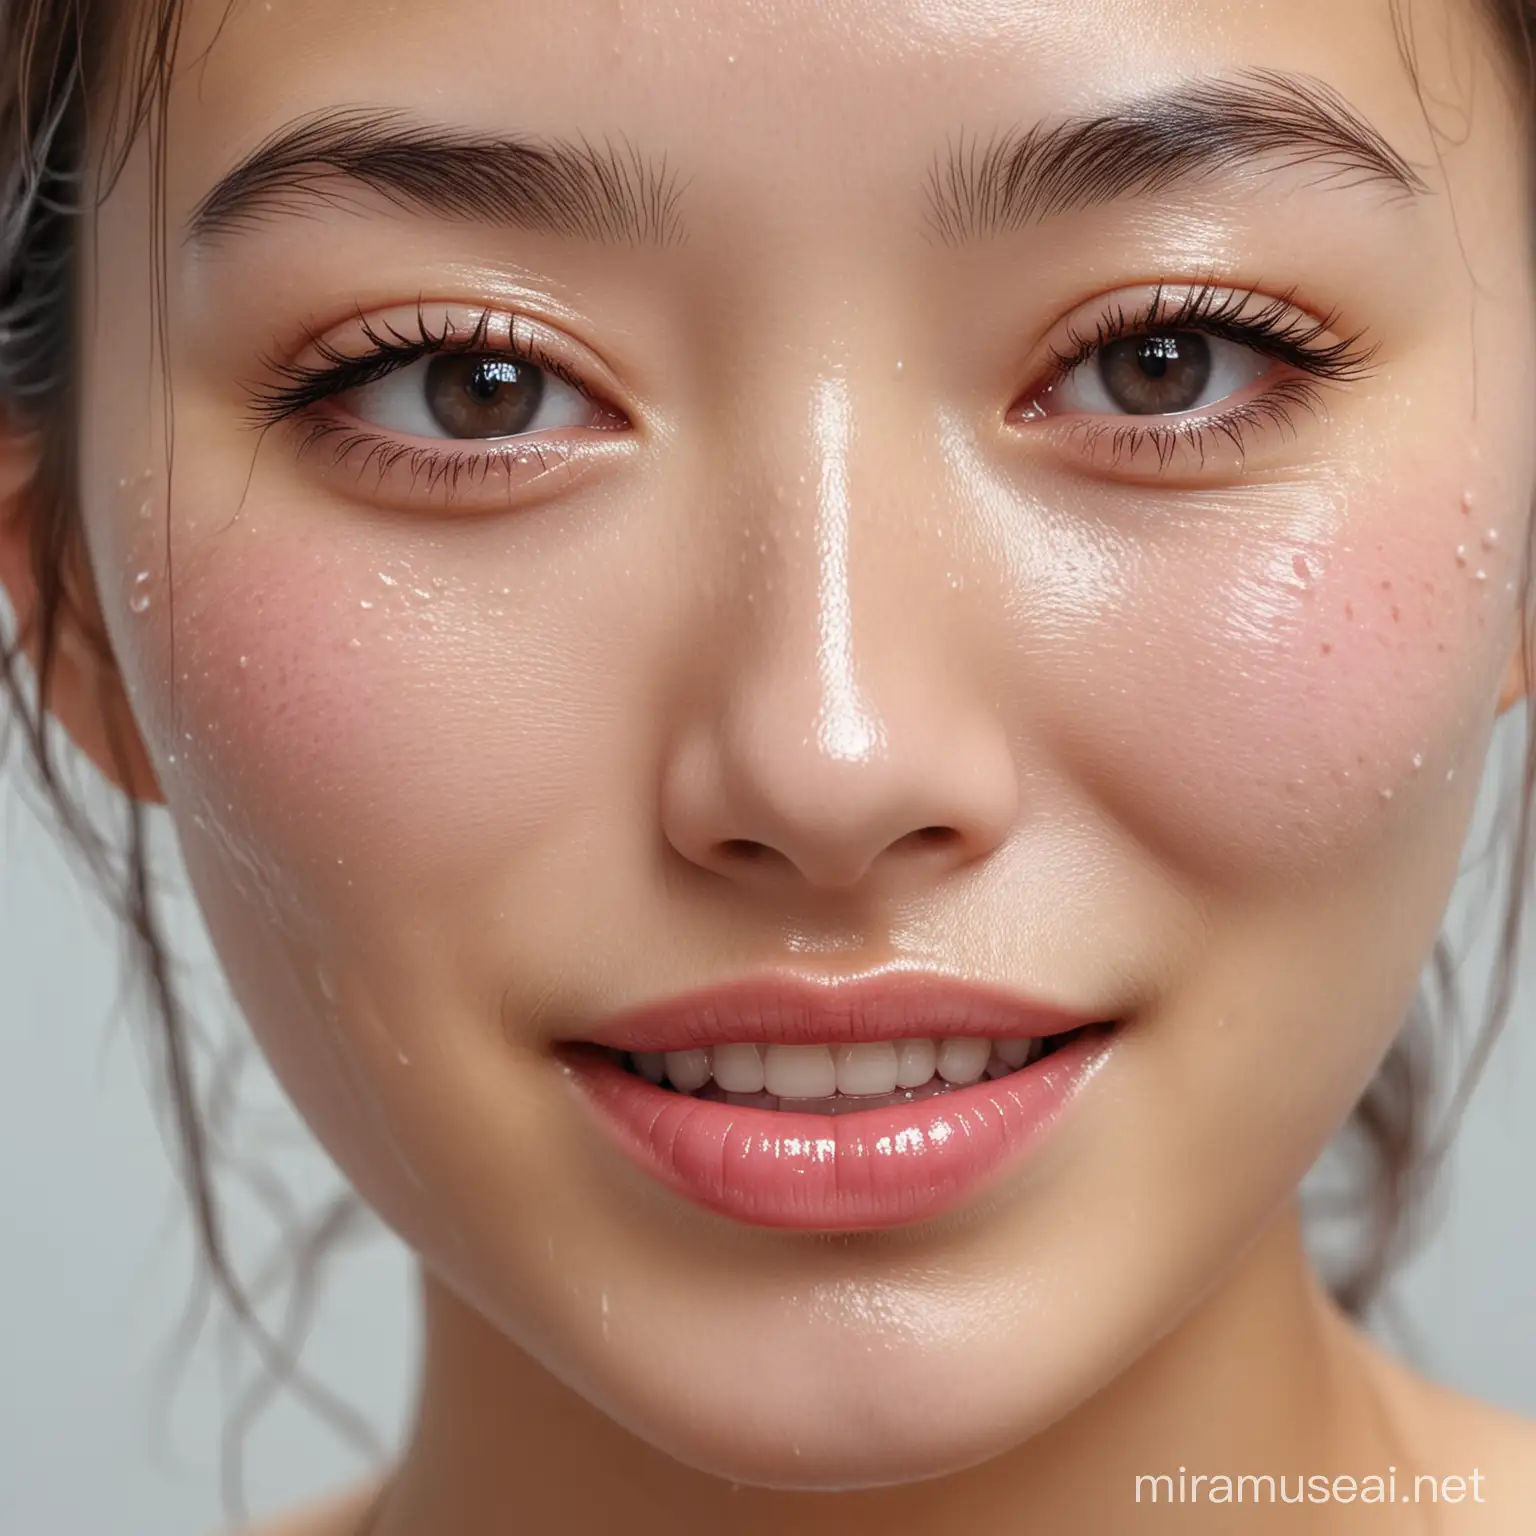 Pretty korean girl smiling, wet natural full lips, sweaty, close up focus to mouth